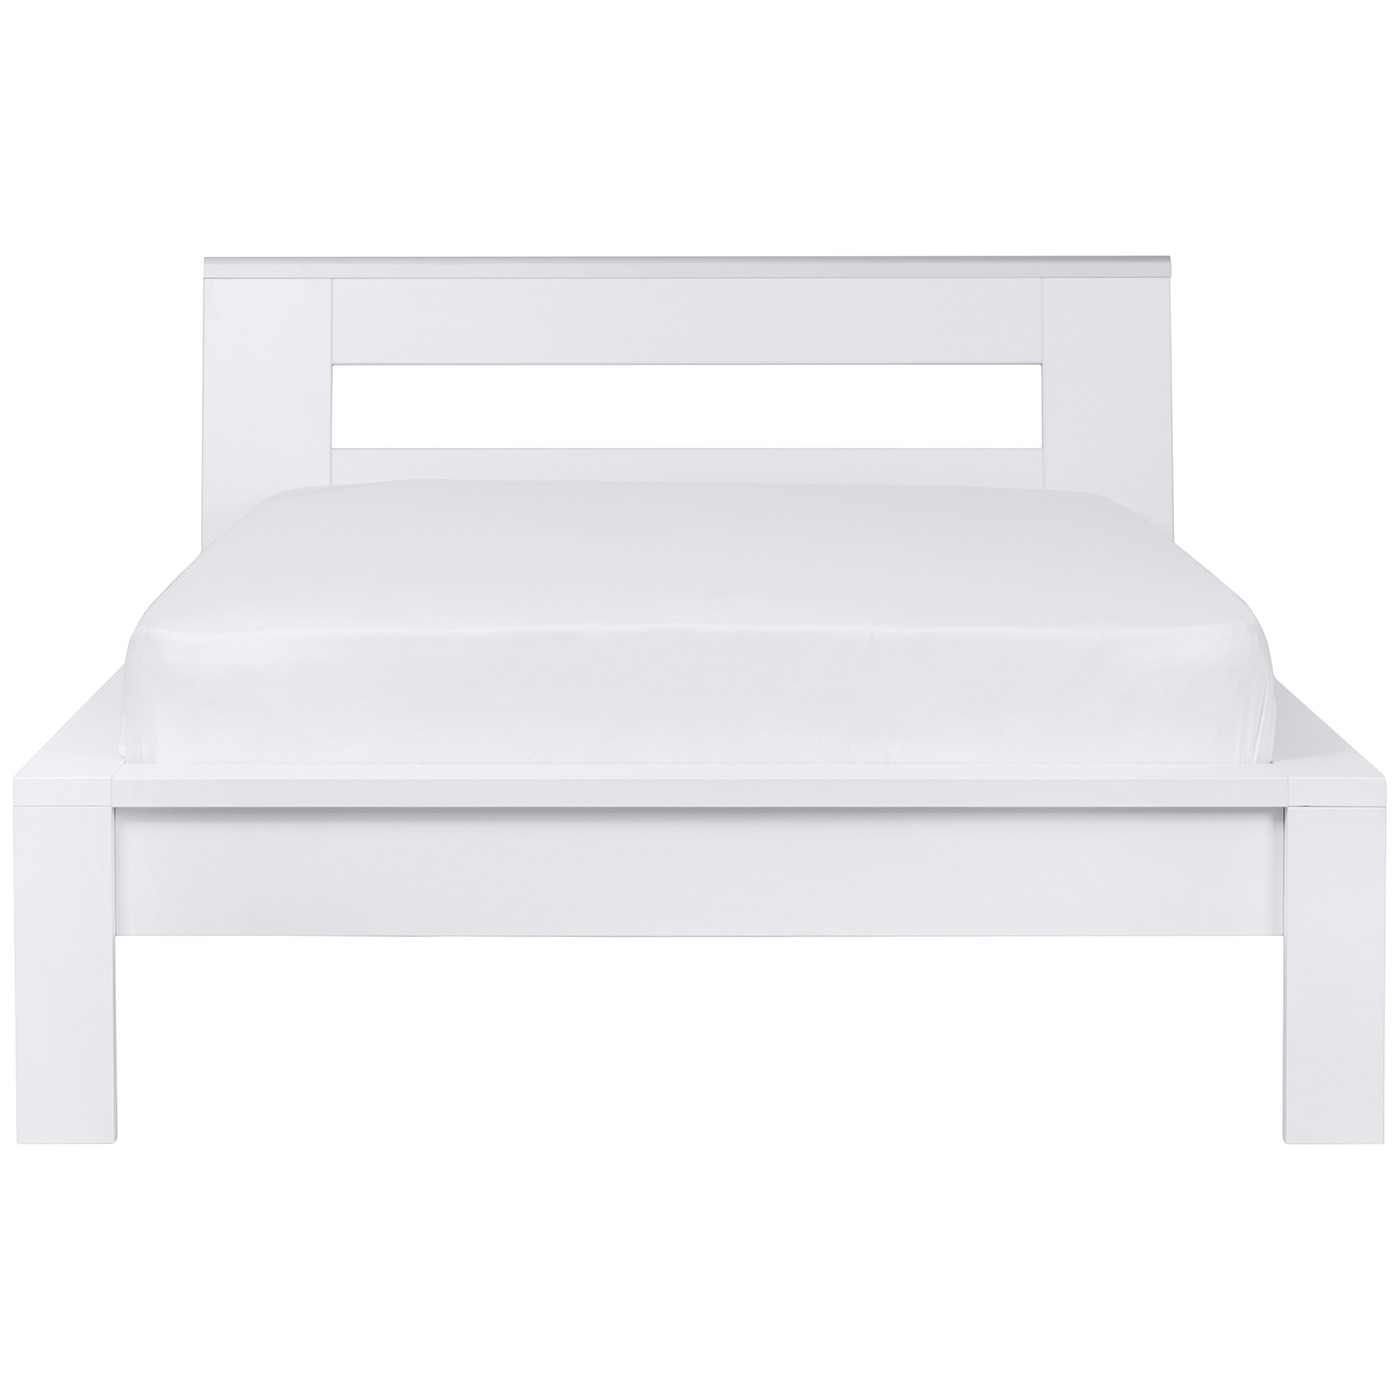 BS 1799 017 3 – Trends Bed 120×200 White WSlat (2)